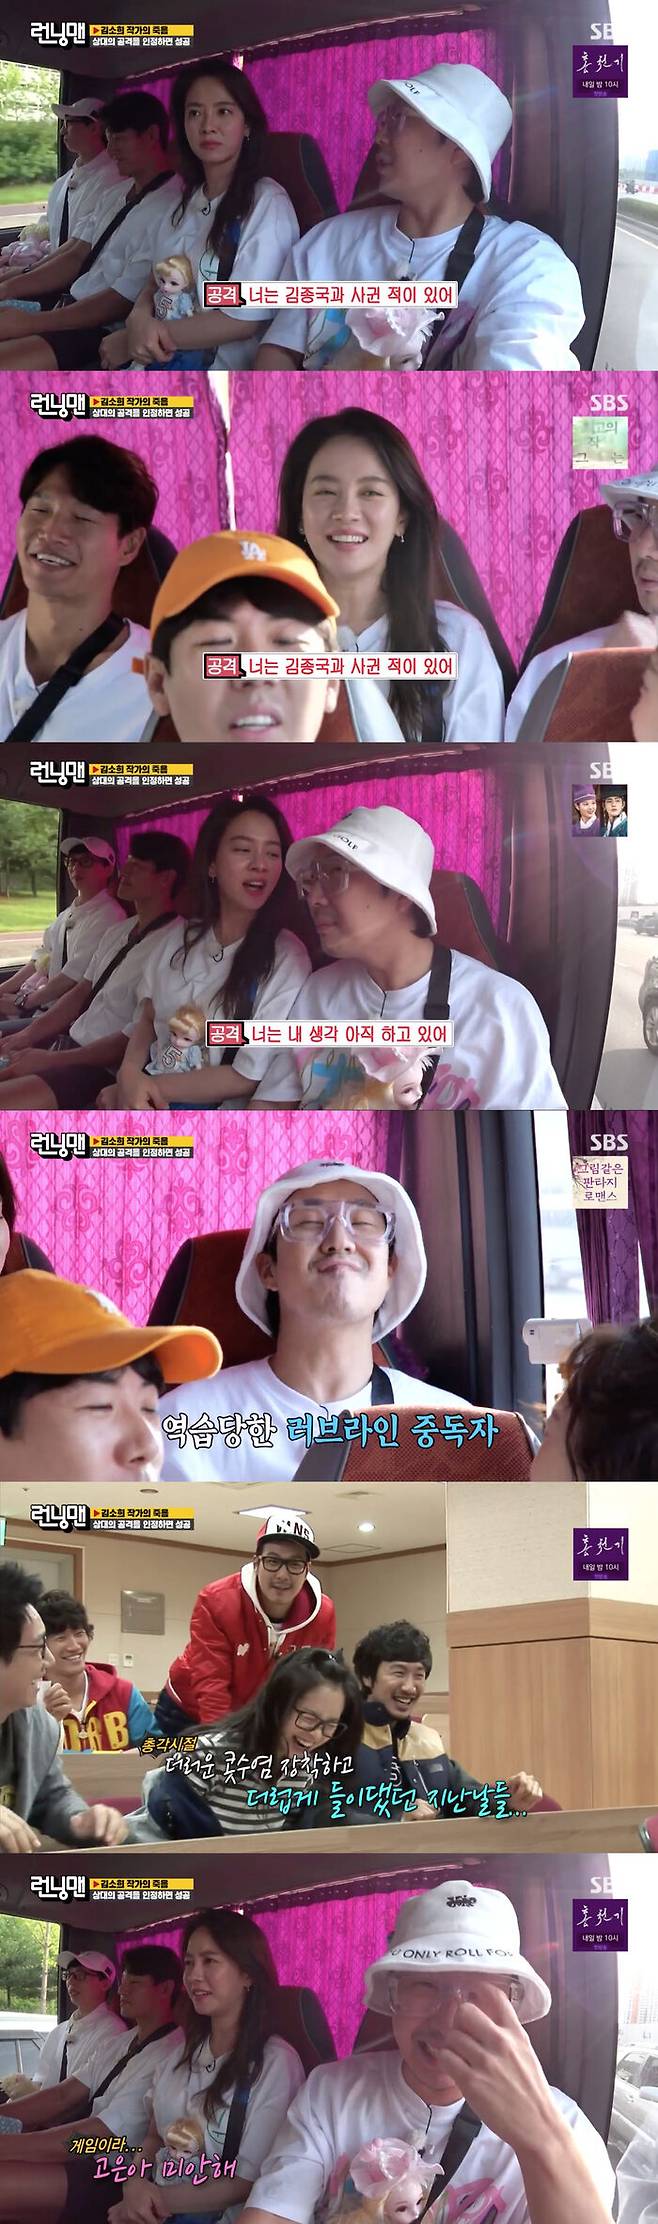 Song Ji-hyo has made a cool admission that he has dated Kim Jong-kook.On SBS Running Man broadcasted on the 29th, Race of a doll was conducted.On the day of the broadcast, Haha attacked Song Ji-hyo, saying, You have been with Kim Jong-kook.So Song Ji-hyo admitted coolly, and Haha drove Song Ji-hyo and Kim Jong-kook, saying that he knew it.Song Ji-hyo then shot Haha, who was a love line addict in the past, saying, You are still thinking about me. The production team laughed at Hahas data video, which was constantly on Song Ji-hyo during his bachelorhood.Haha continued the attack on Song Ji-hyo, saying, You were at Kim Jong-kooks house last night. Song Ji-hyo once again acknowledged and You thought about Yesterday.In the end, Haha laughed and was deducted without admitting the attack, saying, This is really not going to answer.And Song Ji-hyo said, Im sorry for Goo Eun-ah. He expressed his sorry heart to Hahas wife.